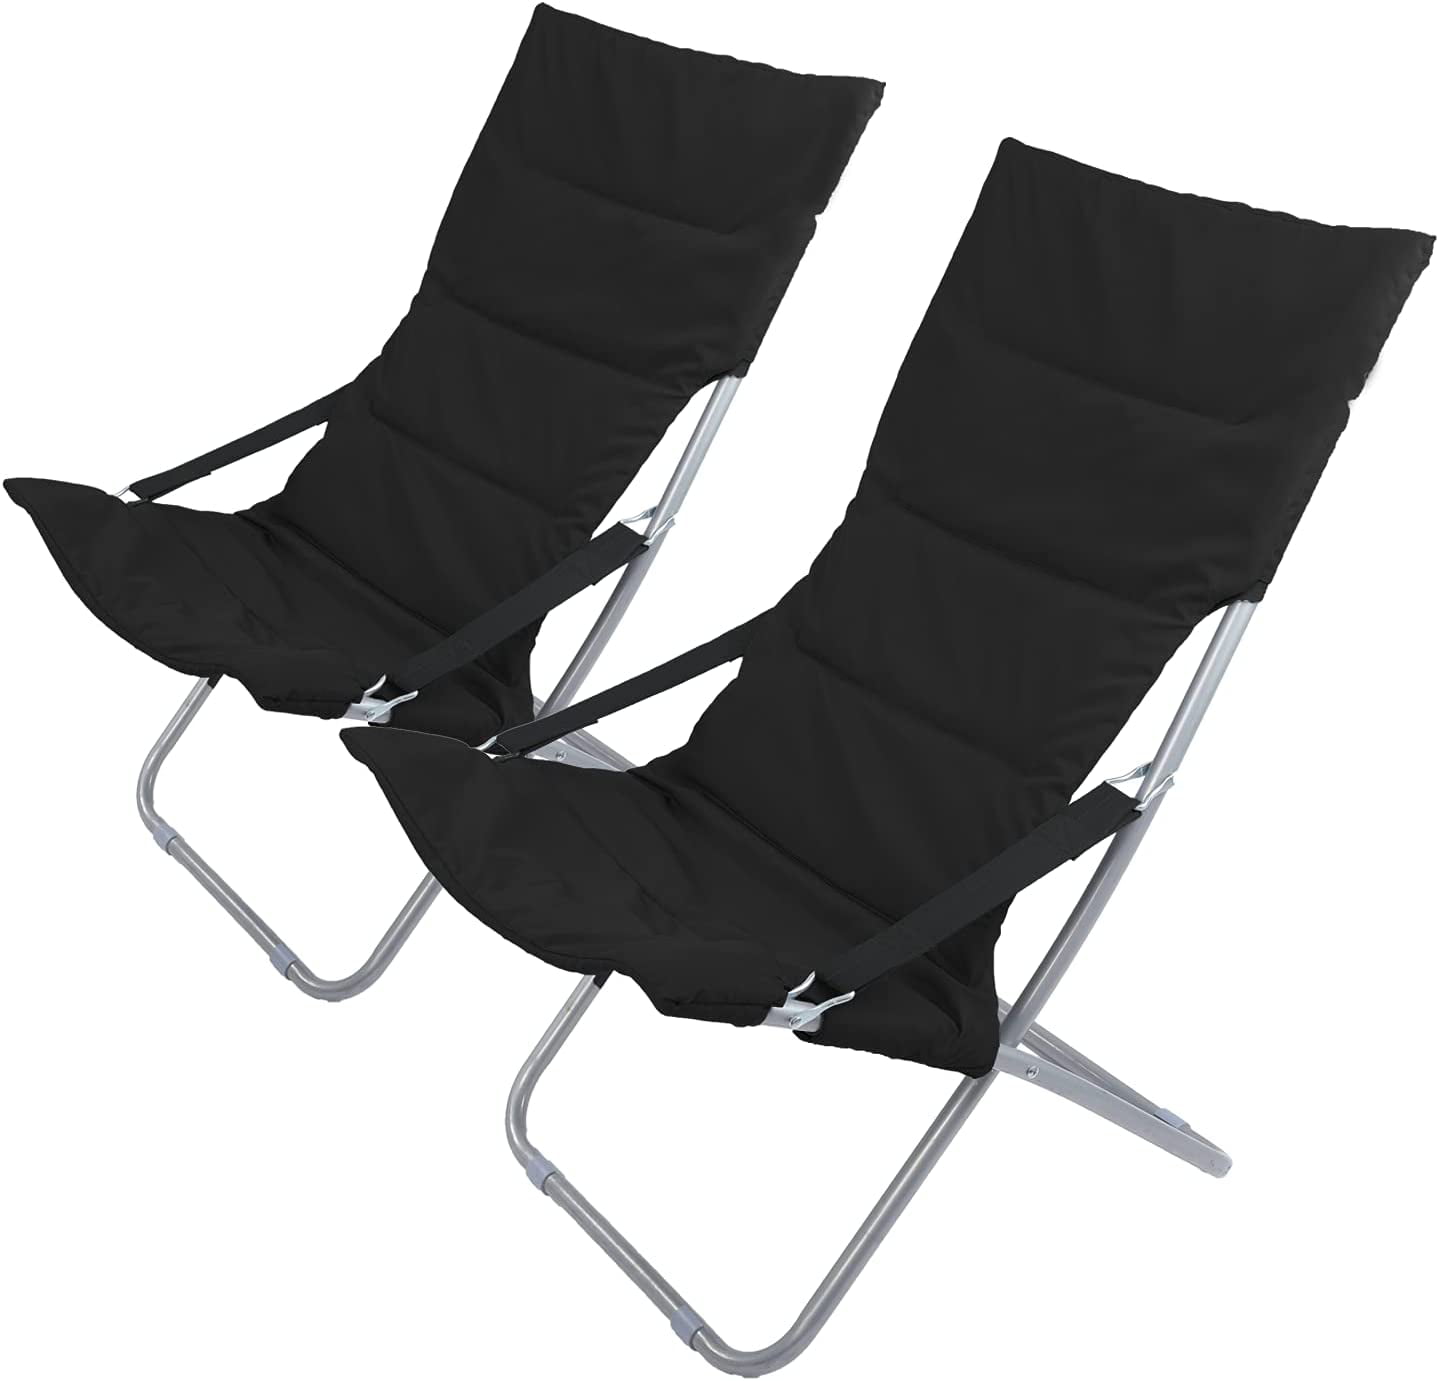 Kingcamp Double Cotton Soft Steel Chair Outdoor Camping Portable Folding Chair 